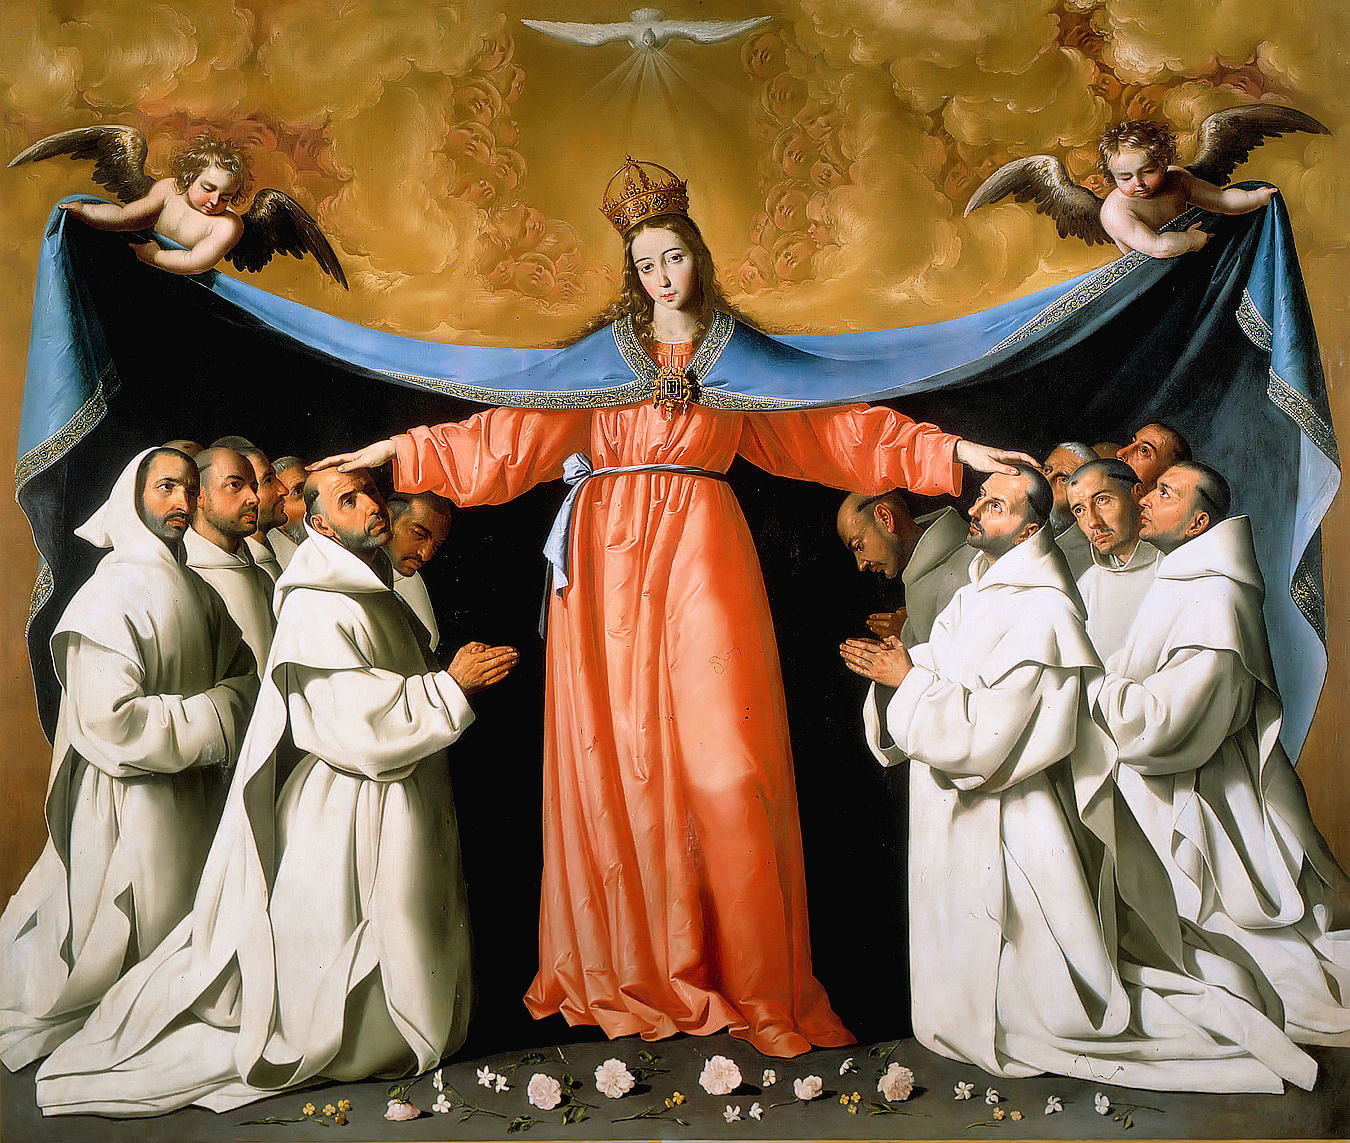 "La Virgen de las Cuevas," painted by Francisco de Zurbarán (1598-1664) between 1644-1655. Mary is being honored under the title "Our Lady of Mercy" at this year's Arizona Rosary Celebration Oct. 23. (Public Domain)